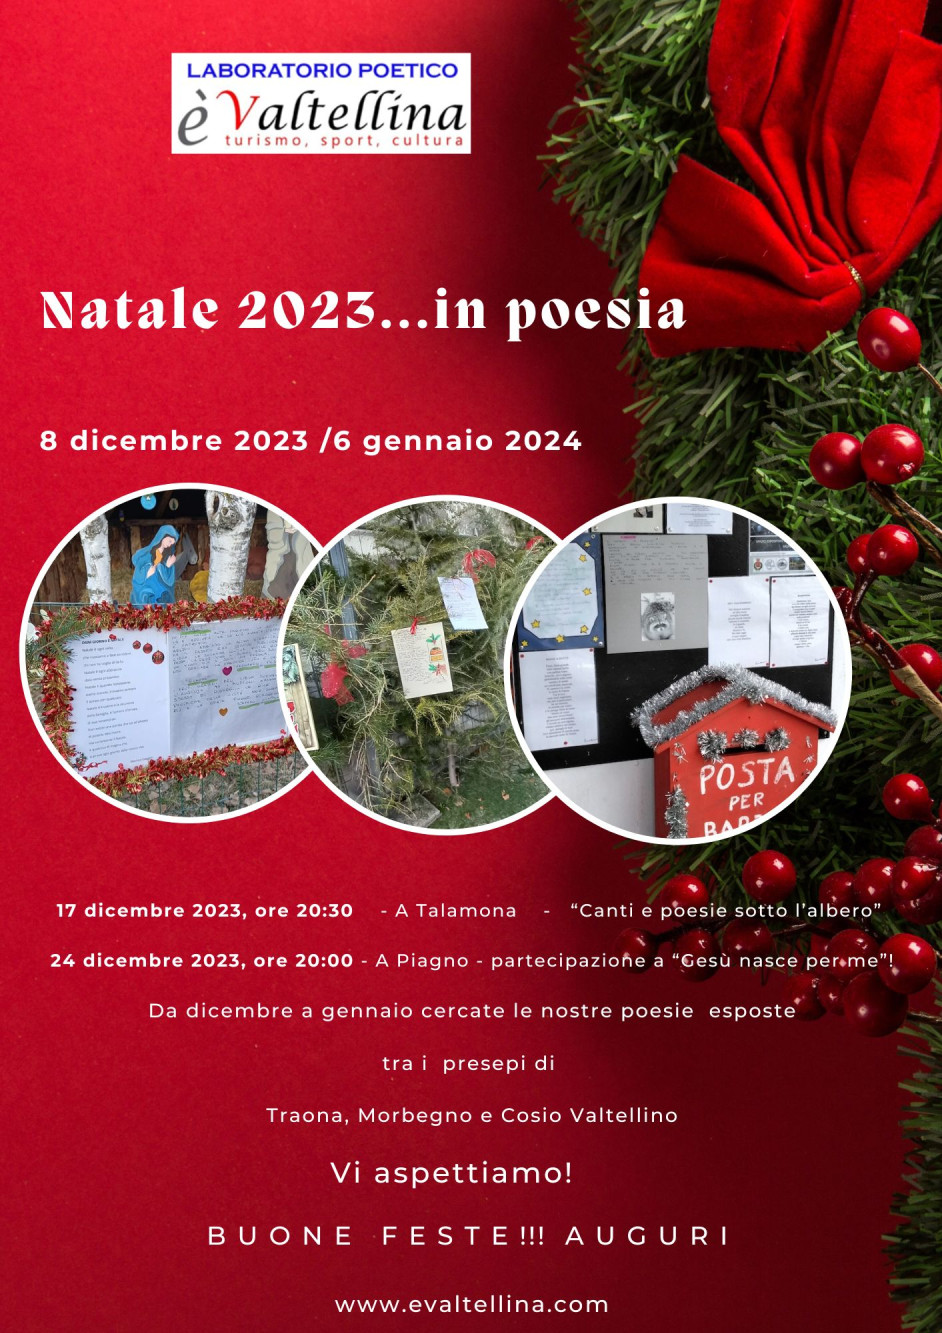 Natale in poesia